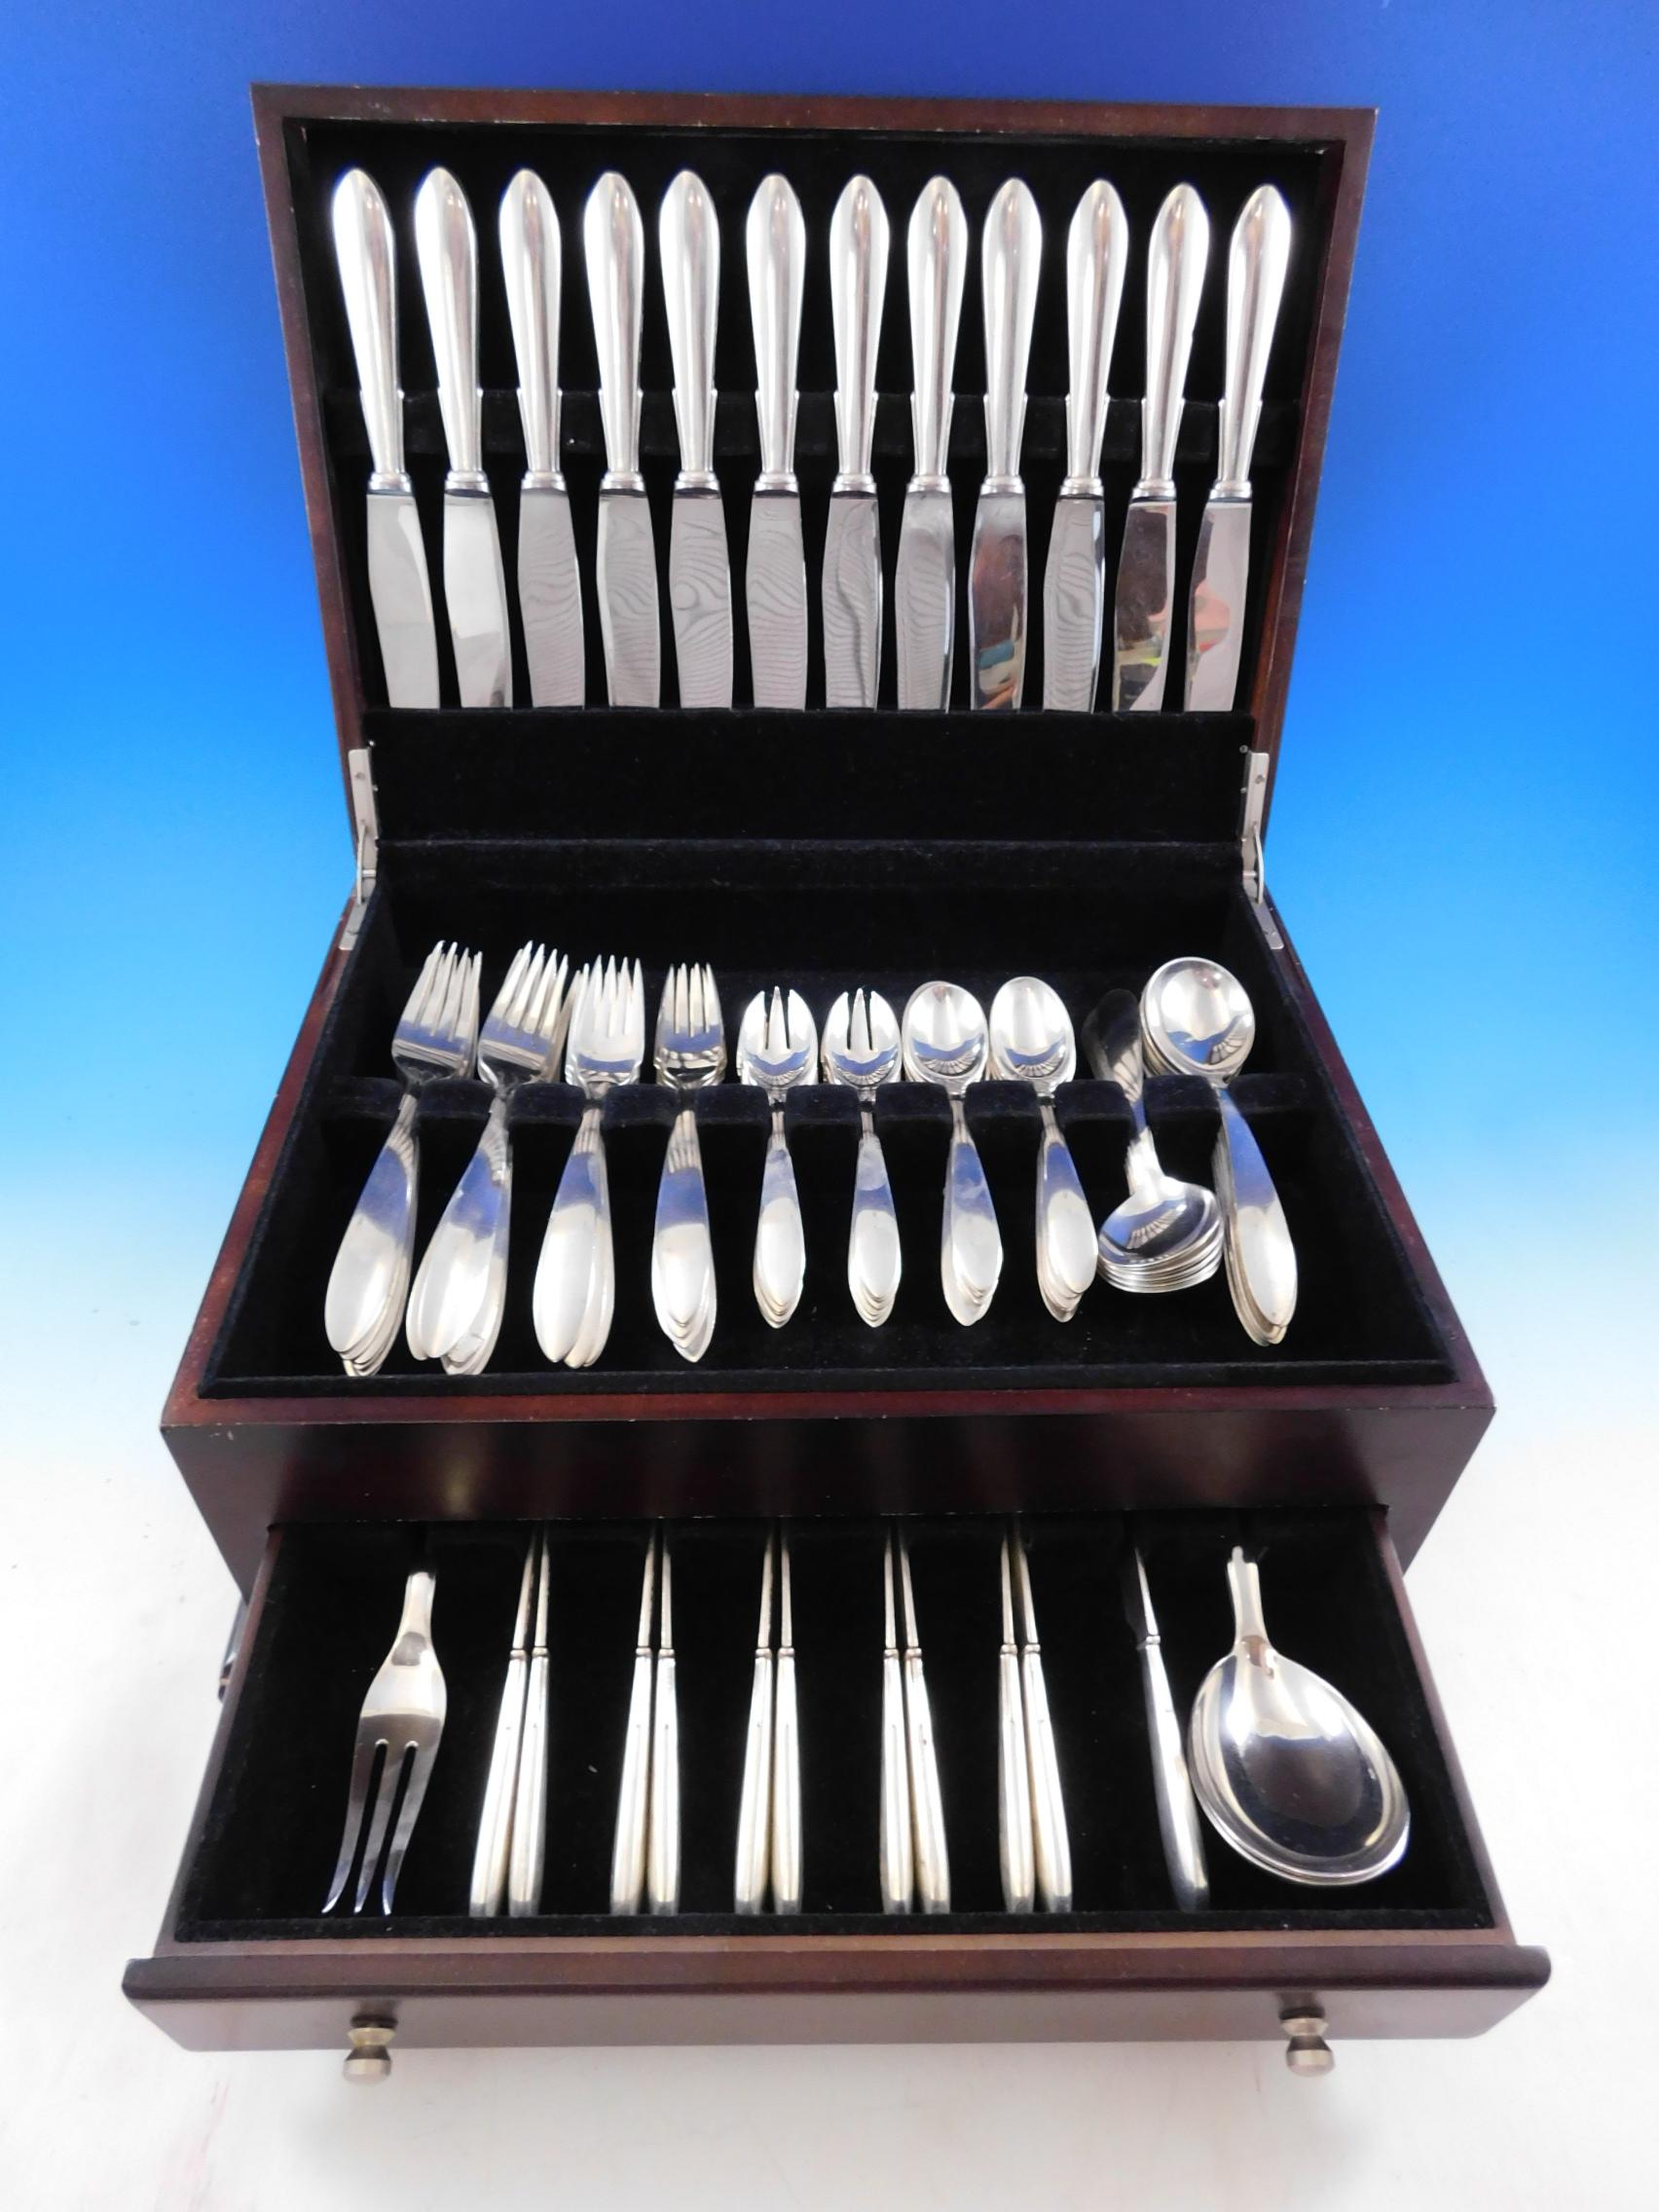 Dinner Size Stromlinie by A. Dragsted Danish Mid-Century Modern sterling silver flatware set - 85 pieces. This scarce handmade set includes:

12 dinner knives, 9 3/4